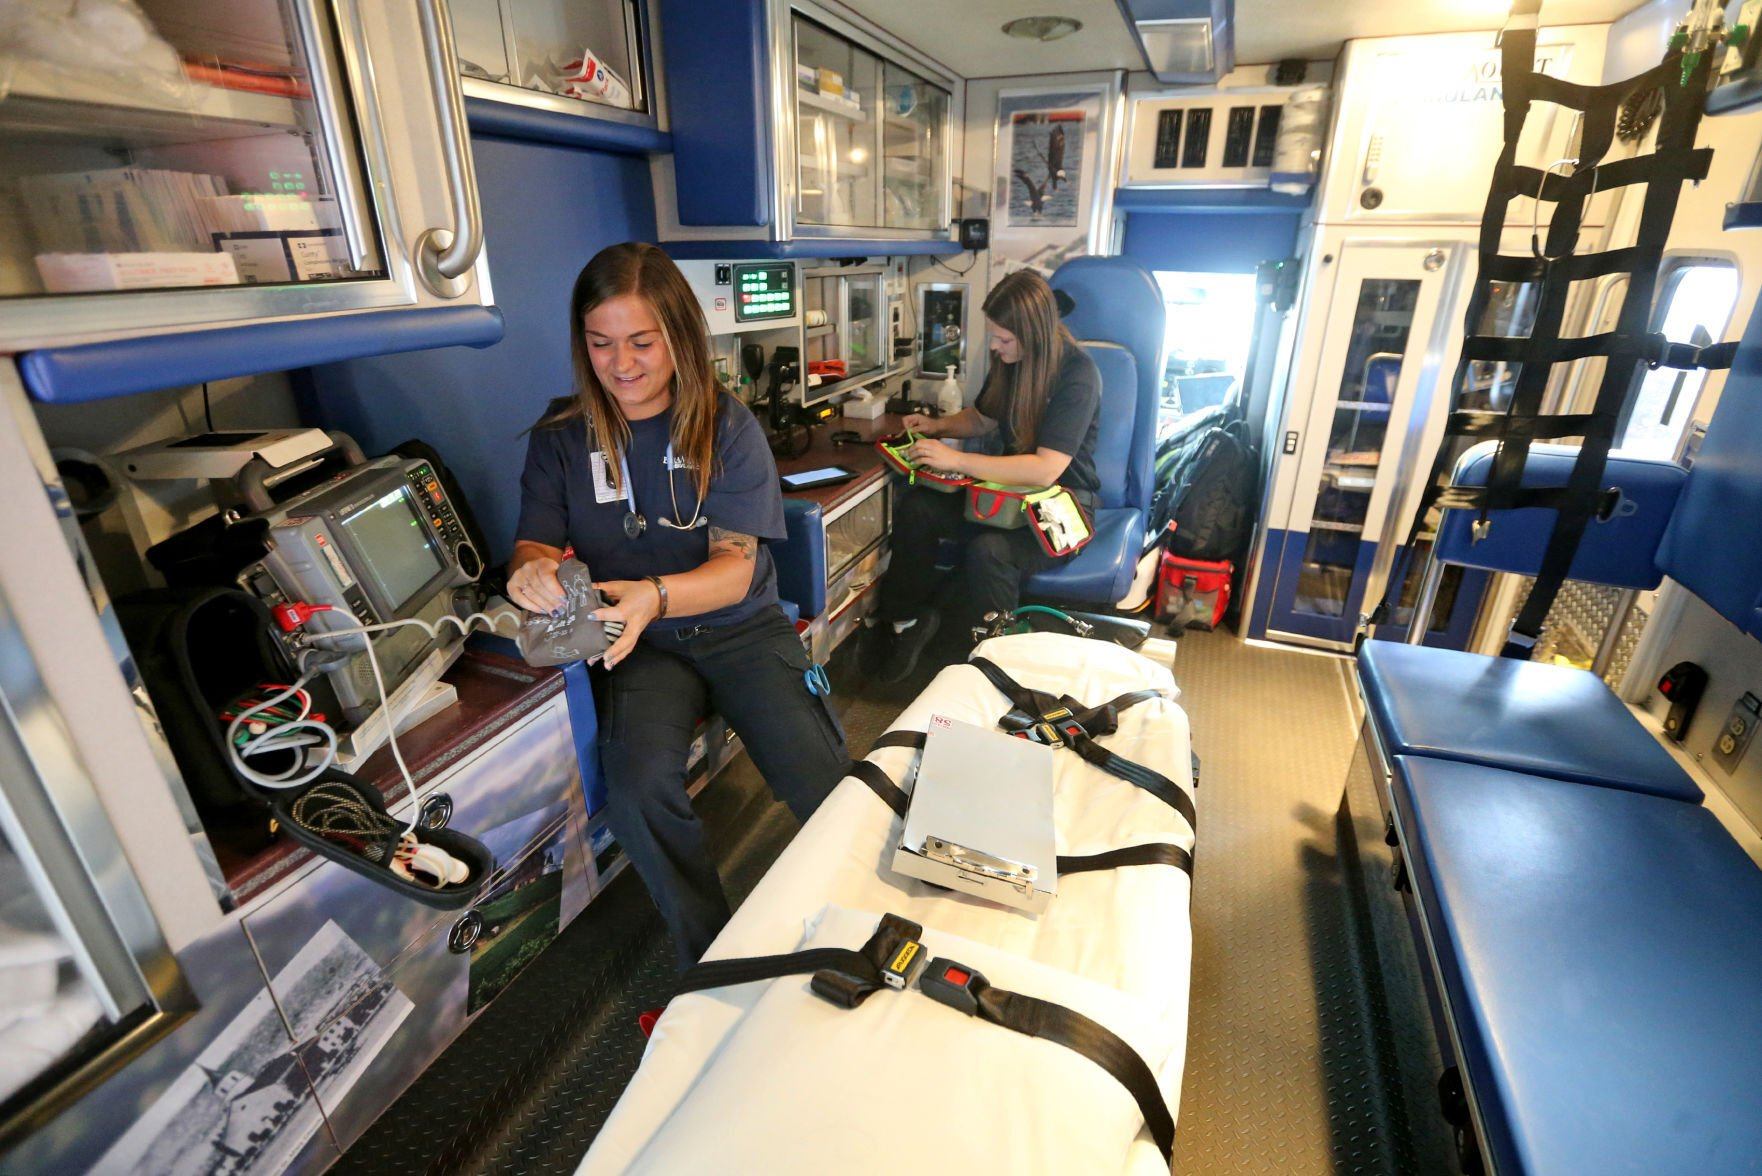 Bailey Dragusica (left) and Karoline Stratton check supplies in an ambulance at Paramount Ambulance in Dubuque on Tuesday.    PHOTO CREDIT: JESSICA REILLY